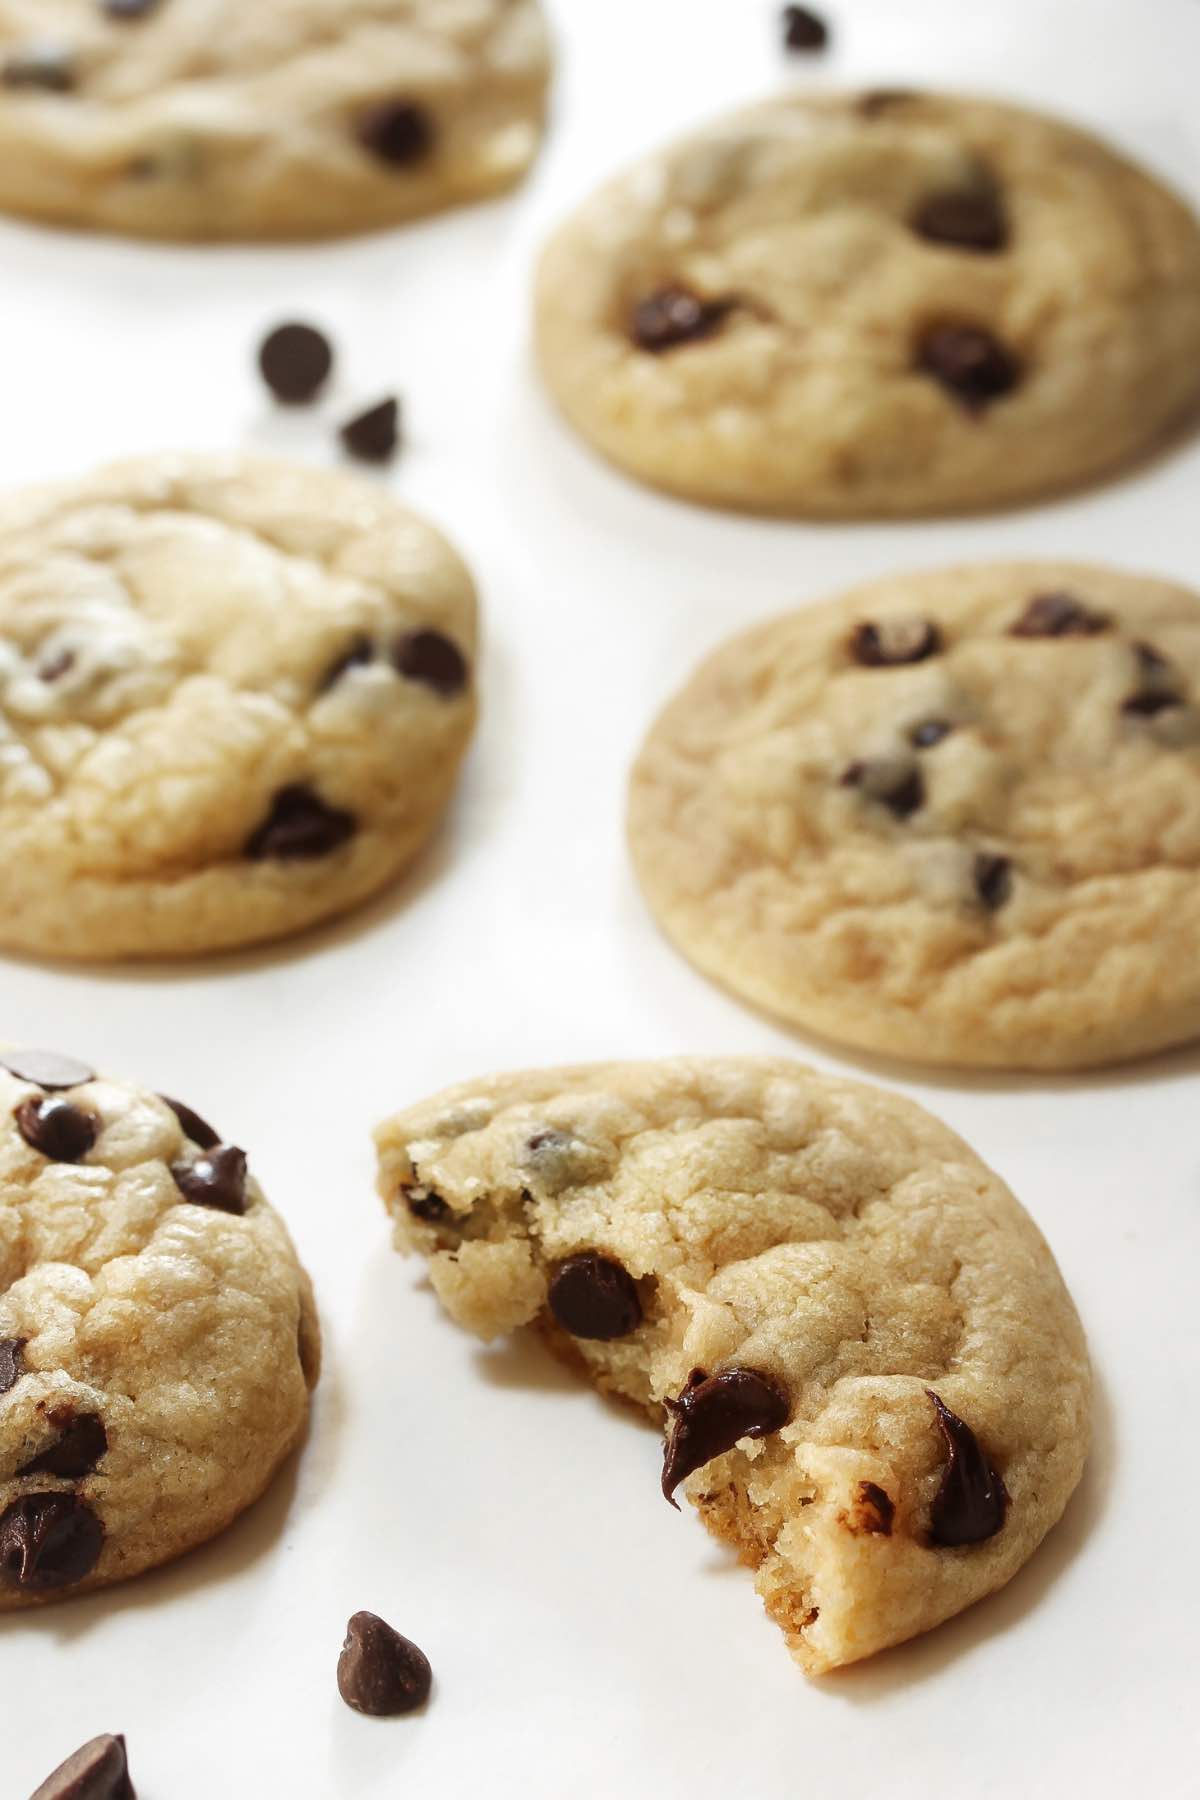 These classic Nestle Toll House Cookies are chewy, buttery, and full of rich original Nestle® Toll House Chocolate Chip Cookies. This recipe is easy to make and features golden brown edges with ooey gooey centers.